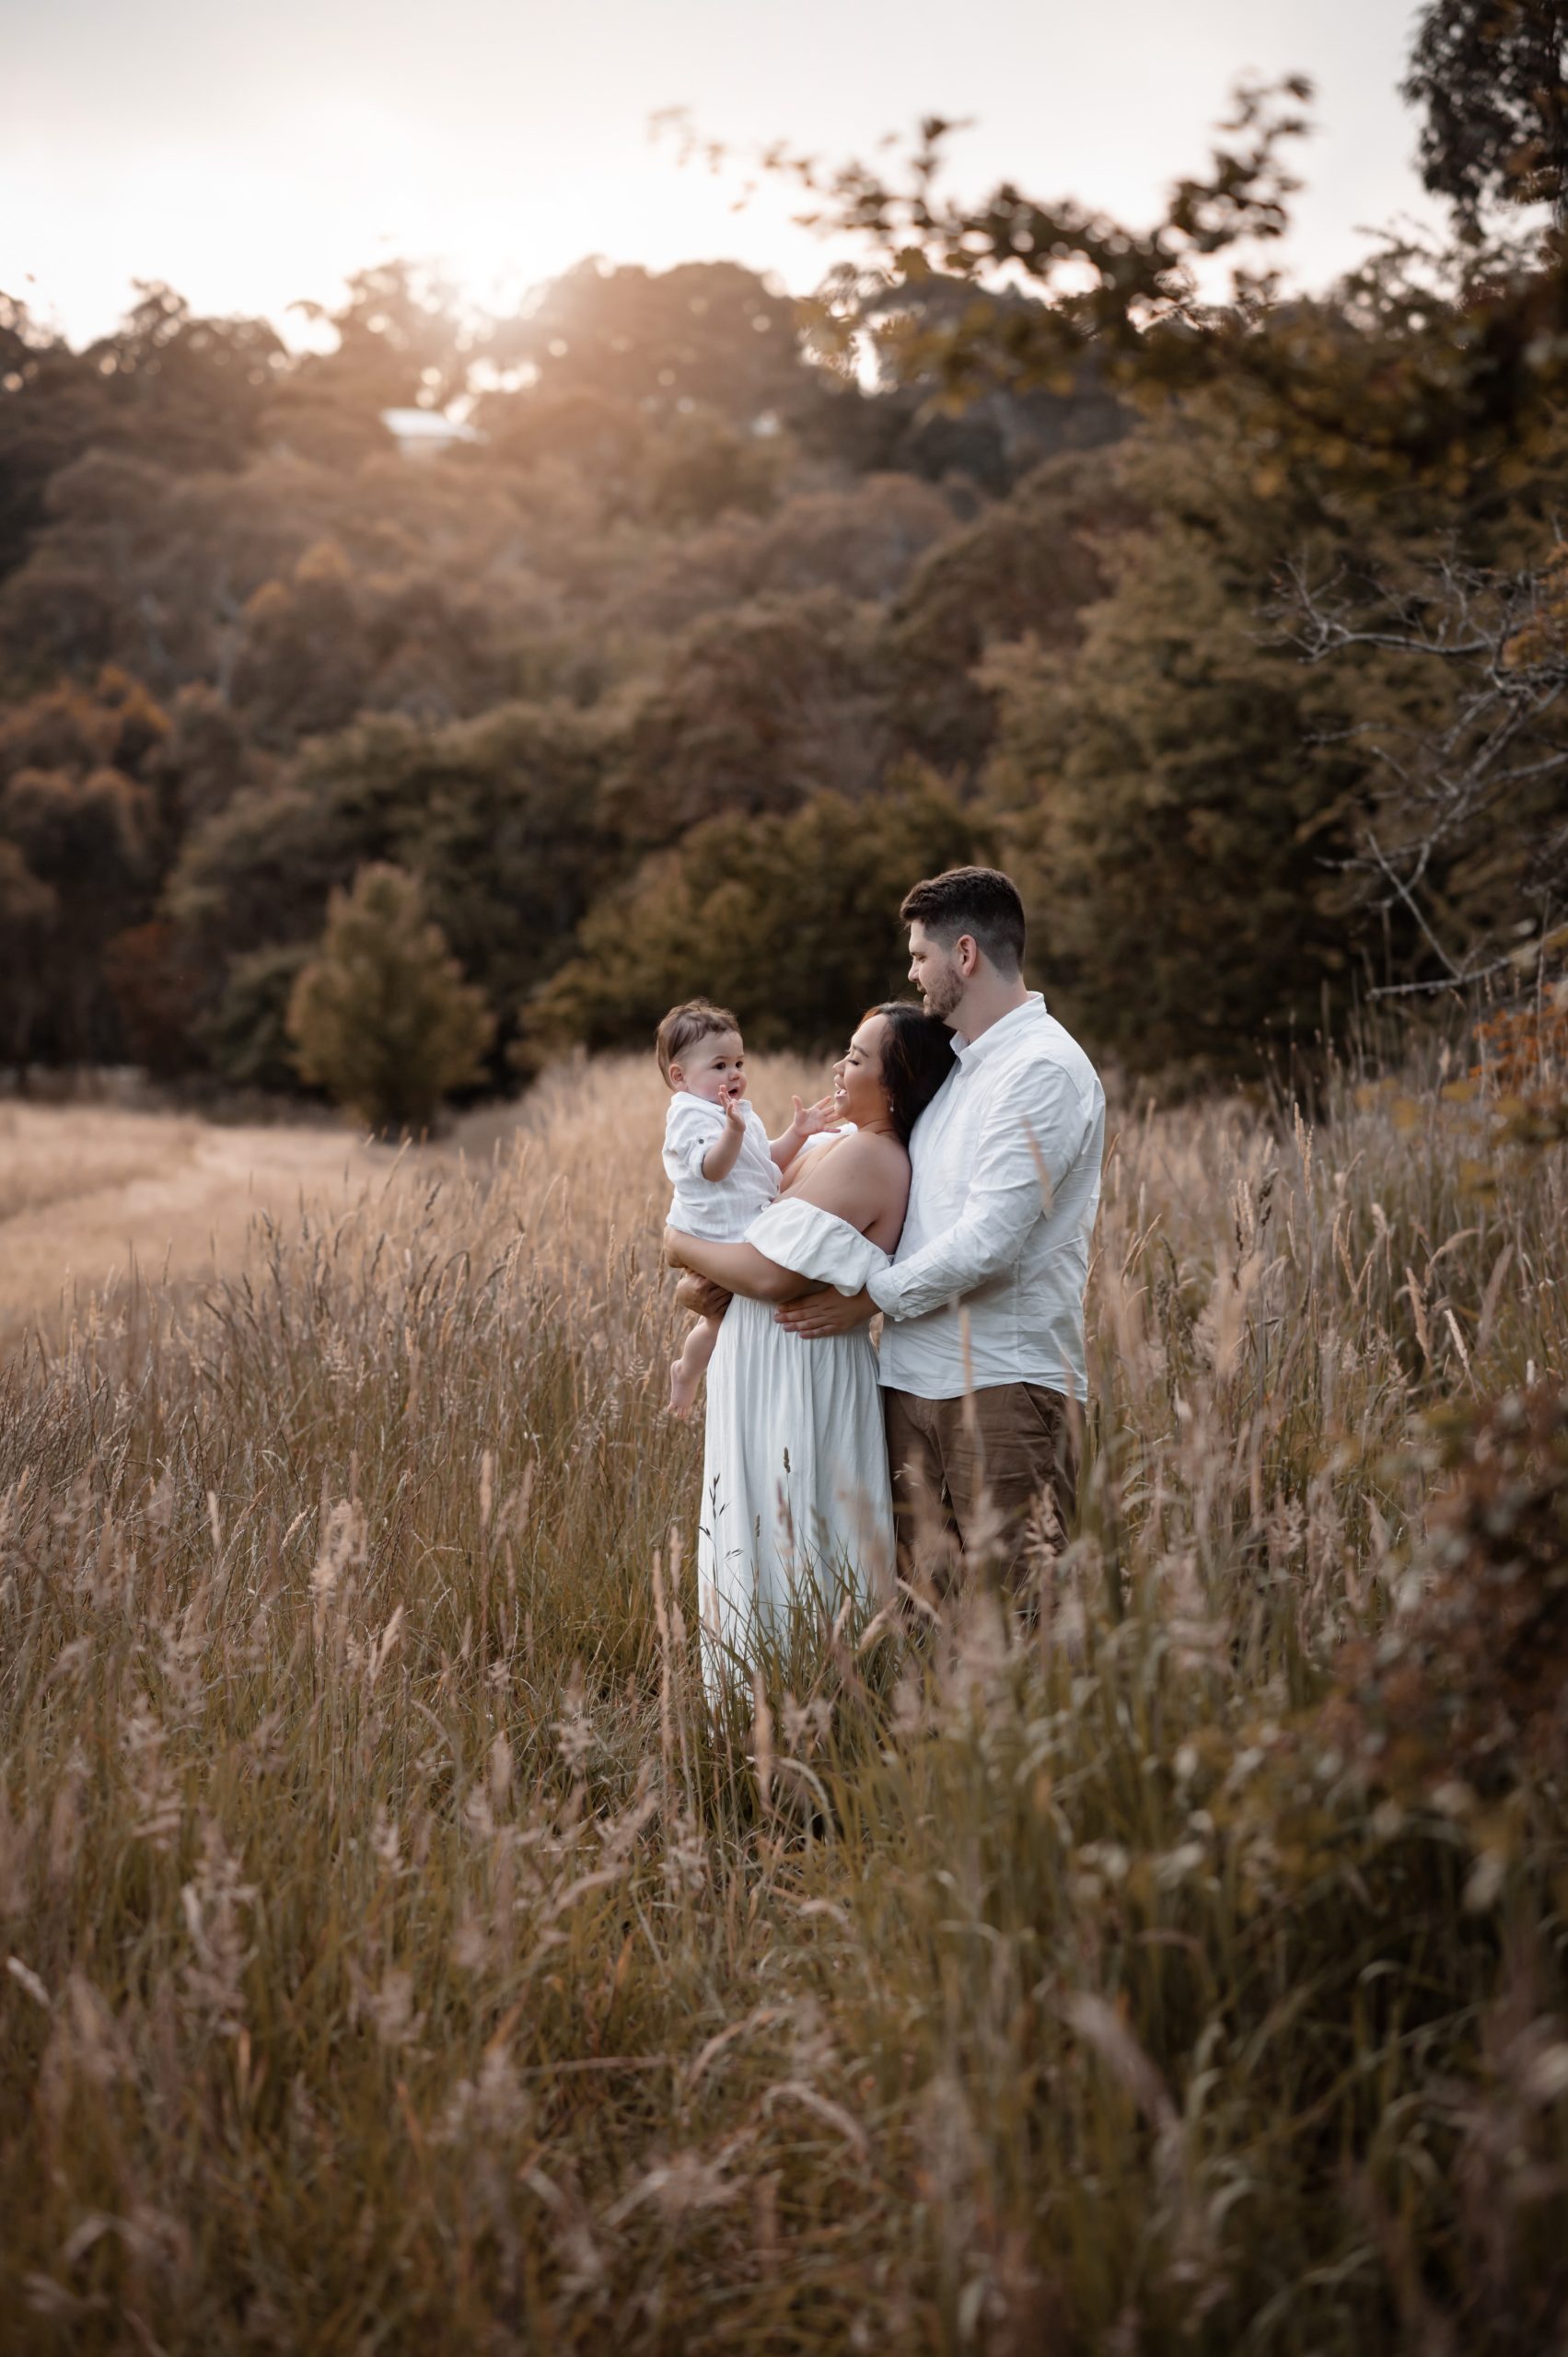 baby Oliver and his family are photographed at our Forest & Field location in Blackwood, South Australia. The evening is warm and the grass is long and wavy, the light from the sunset glows behind the family and falls softly on the field in front of them.